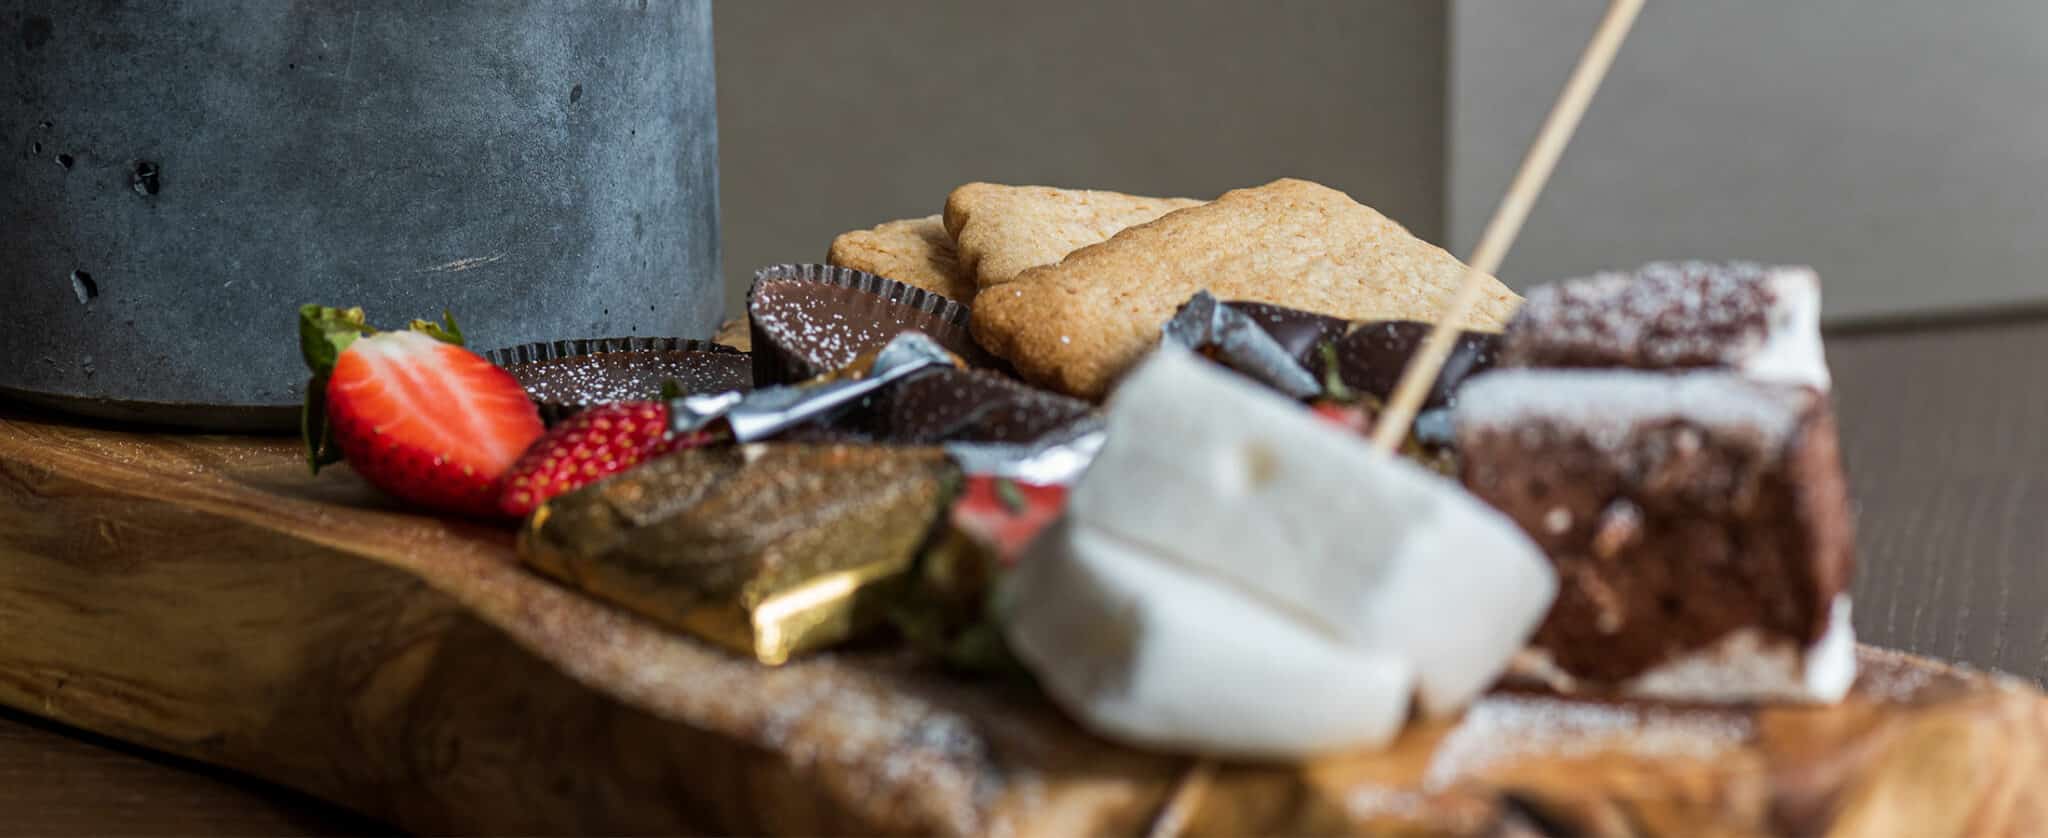 S'more fixings are decoratively placed on a plate near an open flame to make at the table at Grand Hyatt Vail.